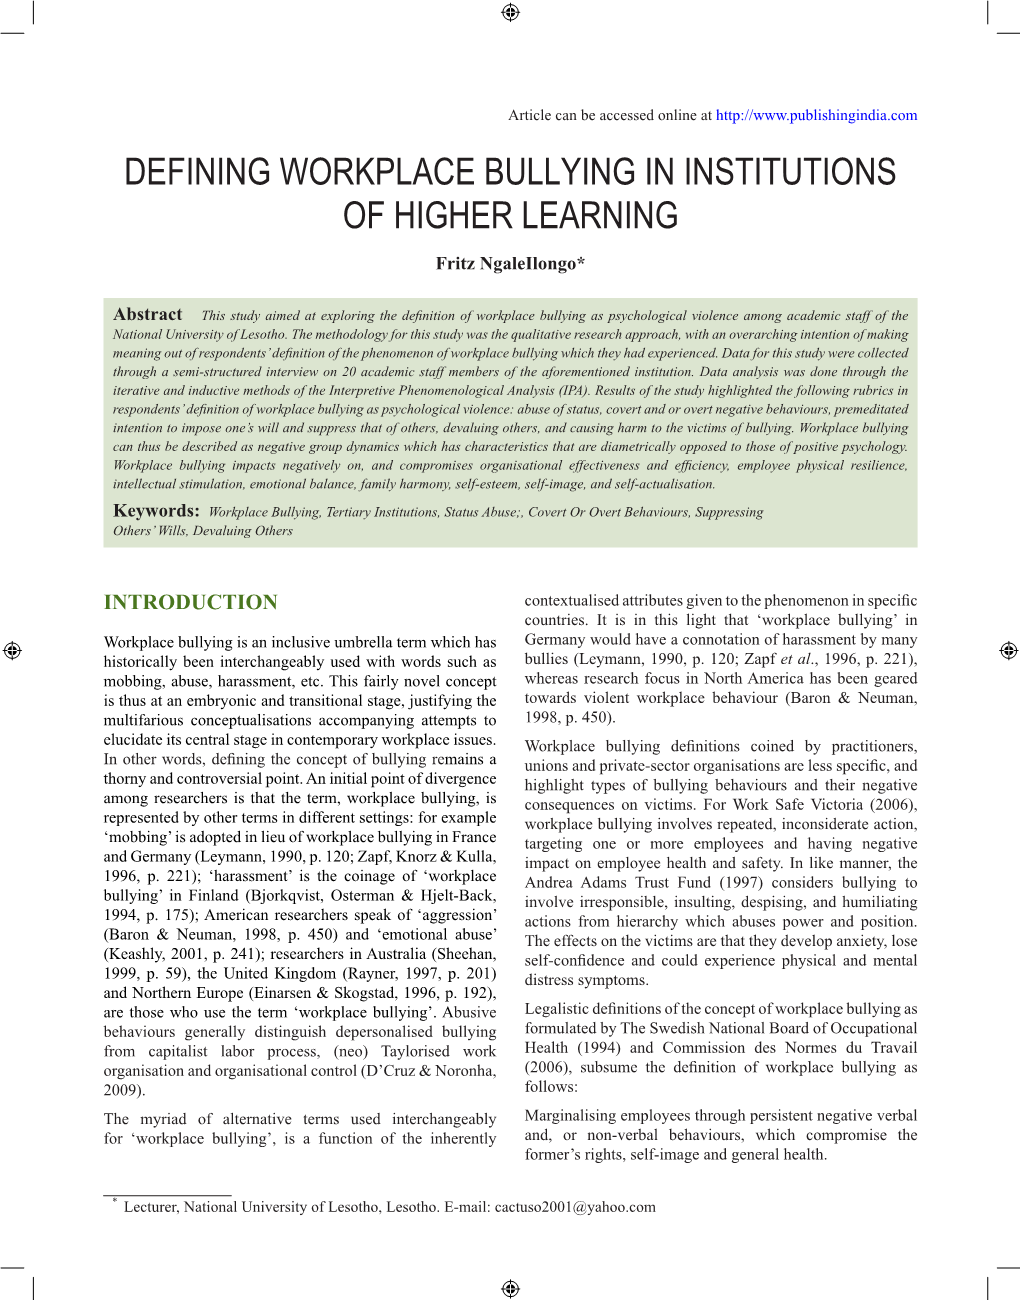 Defining Workplace Bullying in Institutions of Higher Learning